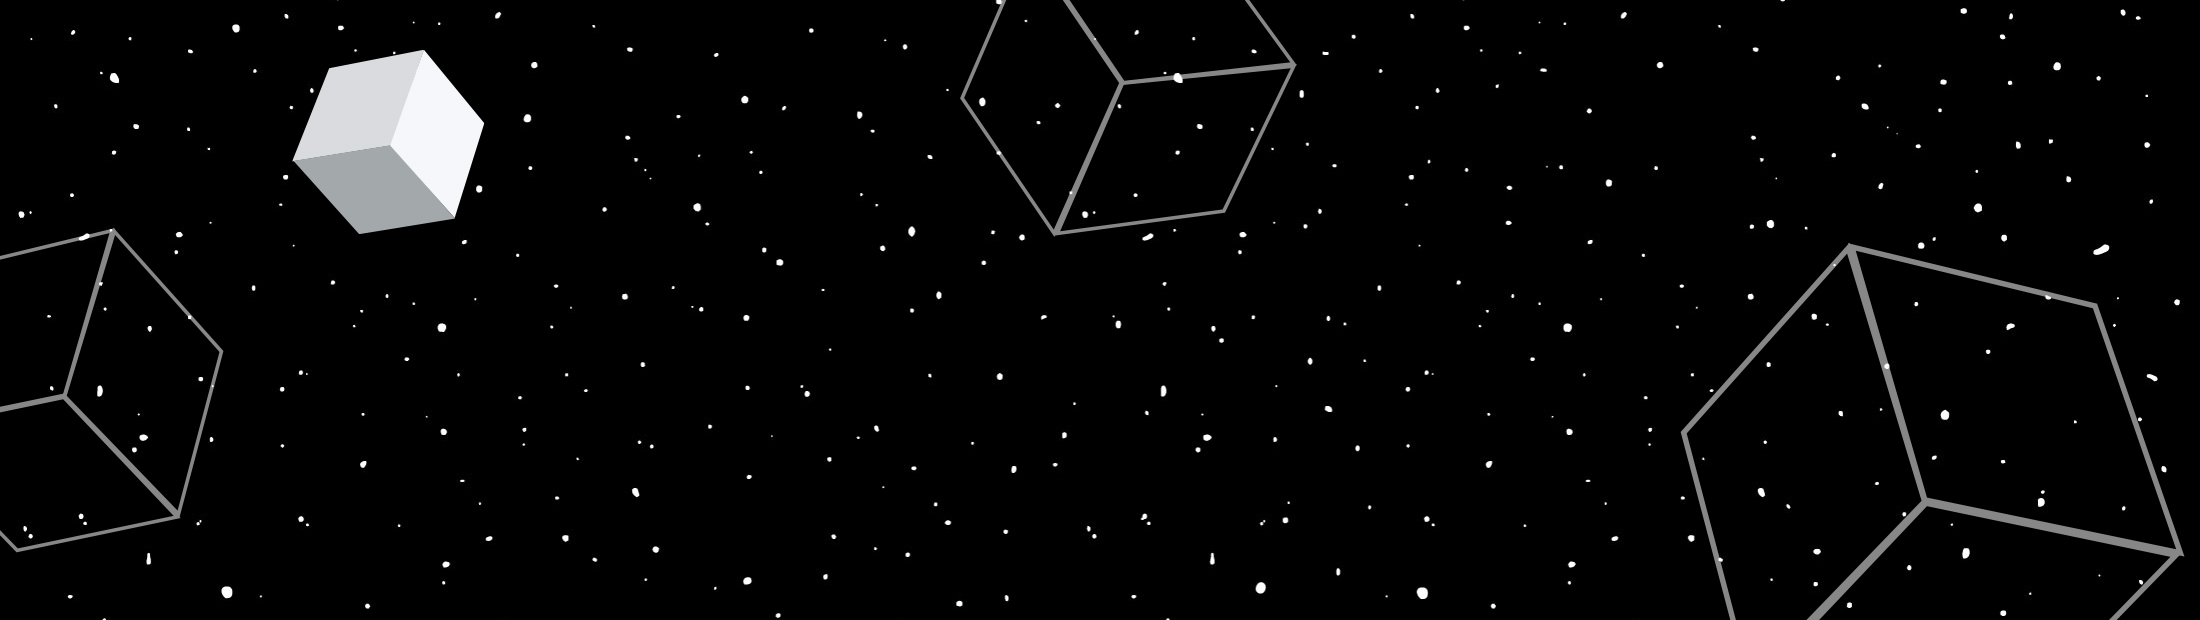 A rendering of stars in space with abstract square shapes